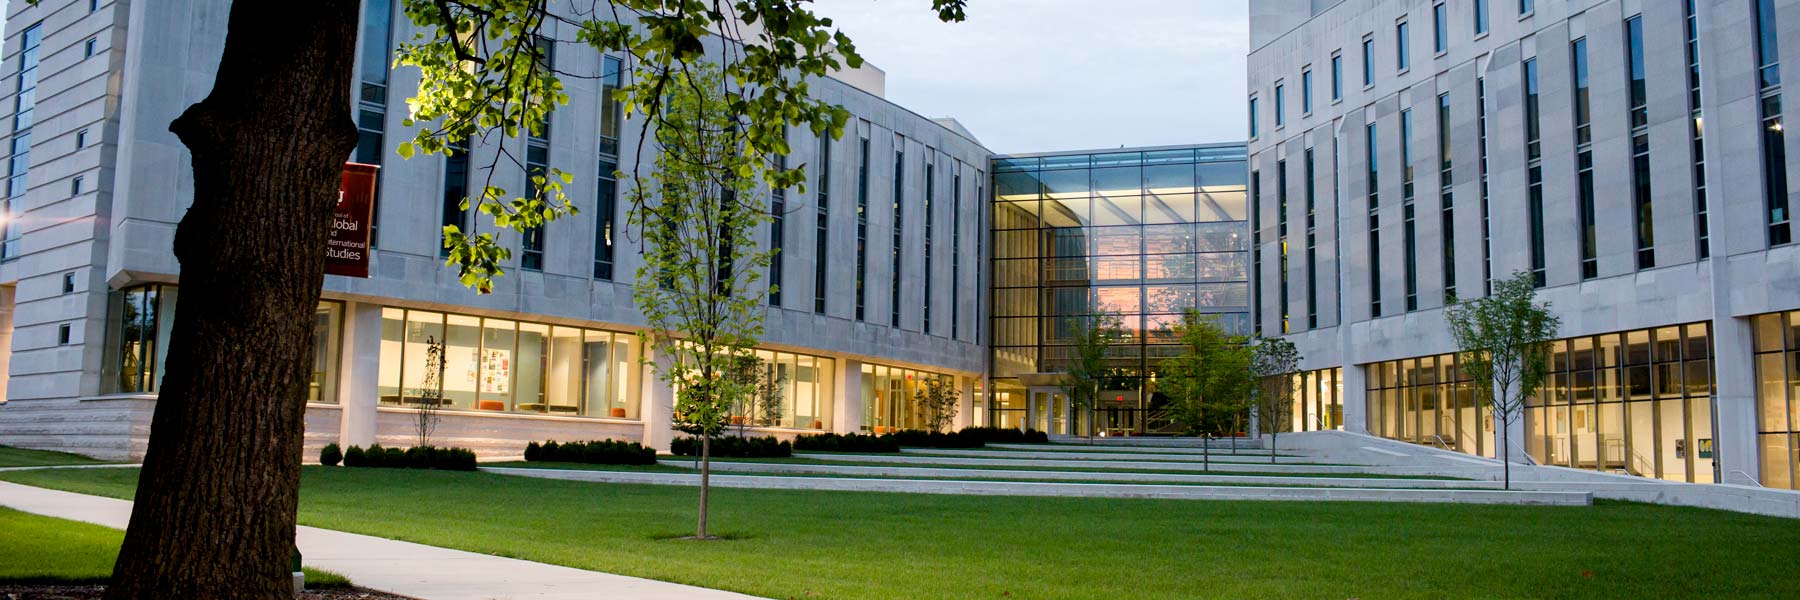 View of the Hamilton Lugar School of Global and International Studies building at dusk with the main public hallways lit a soft yellow from inside.